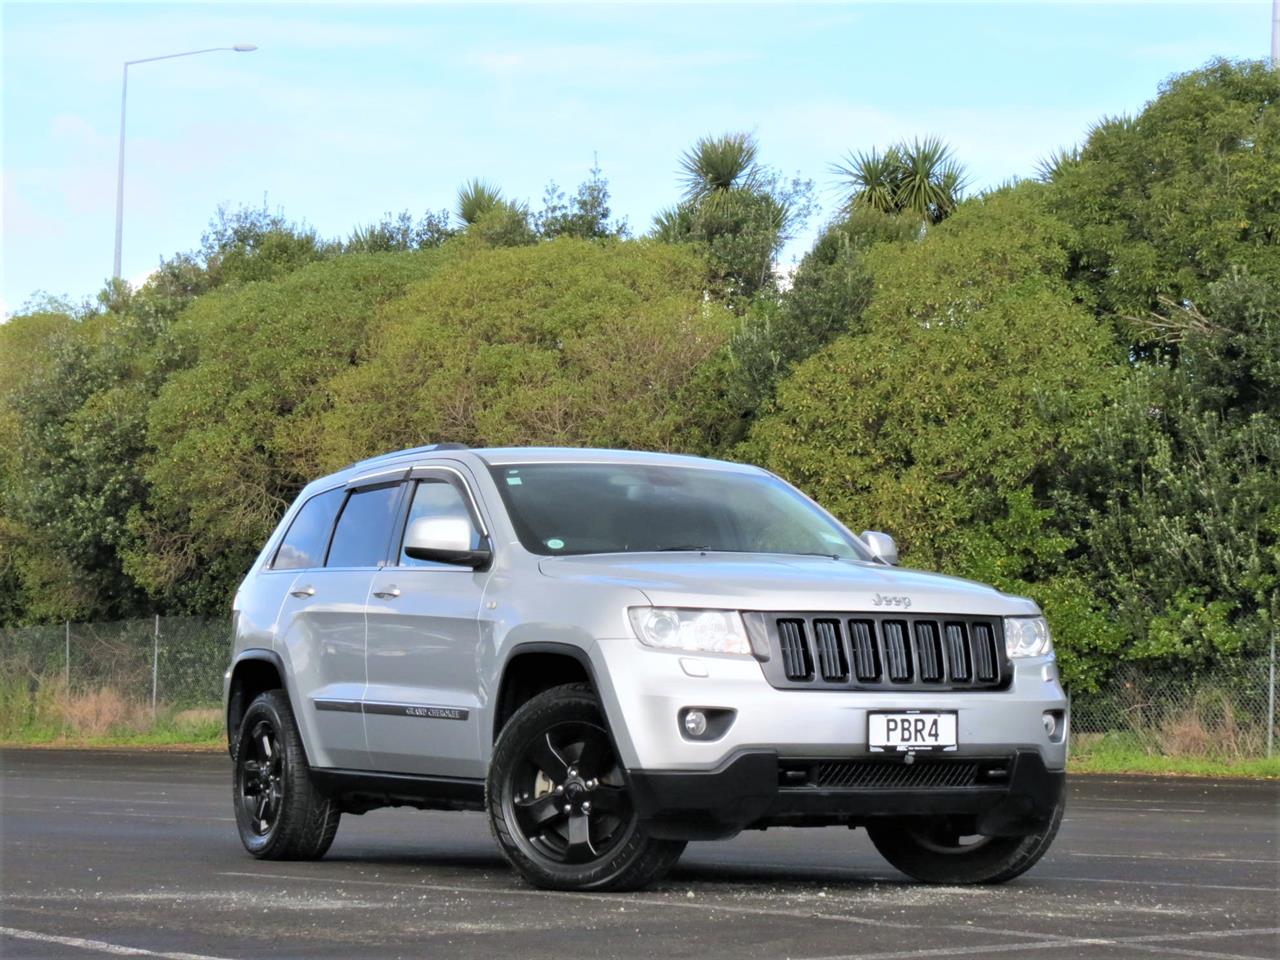 2013 Jeep Grand Cherokee 55 KM'S ONLY + 4WD + GRADE 4.5